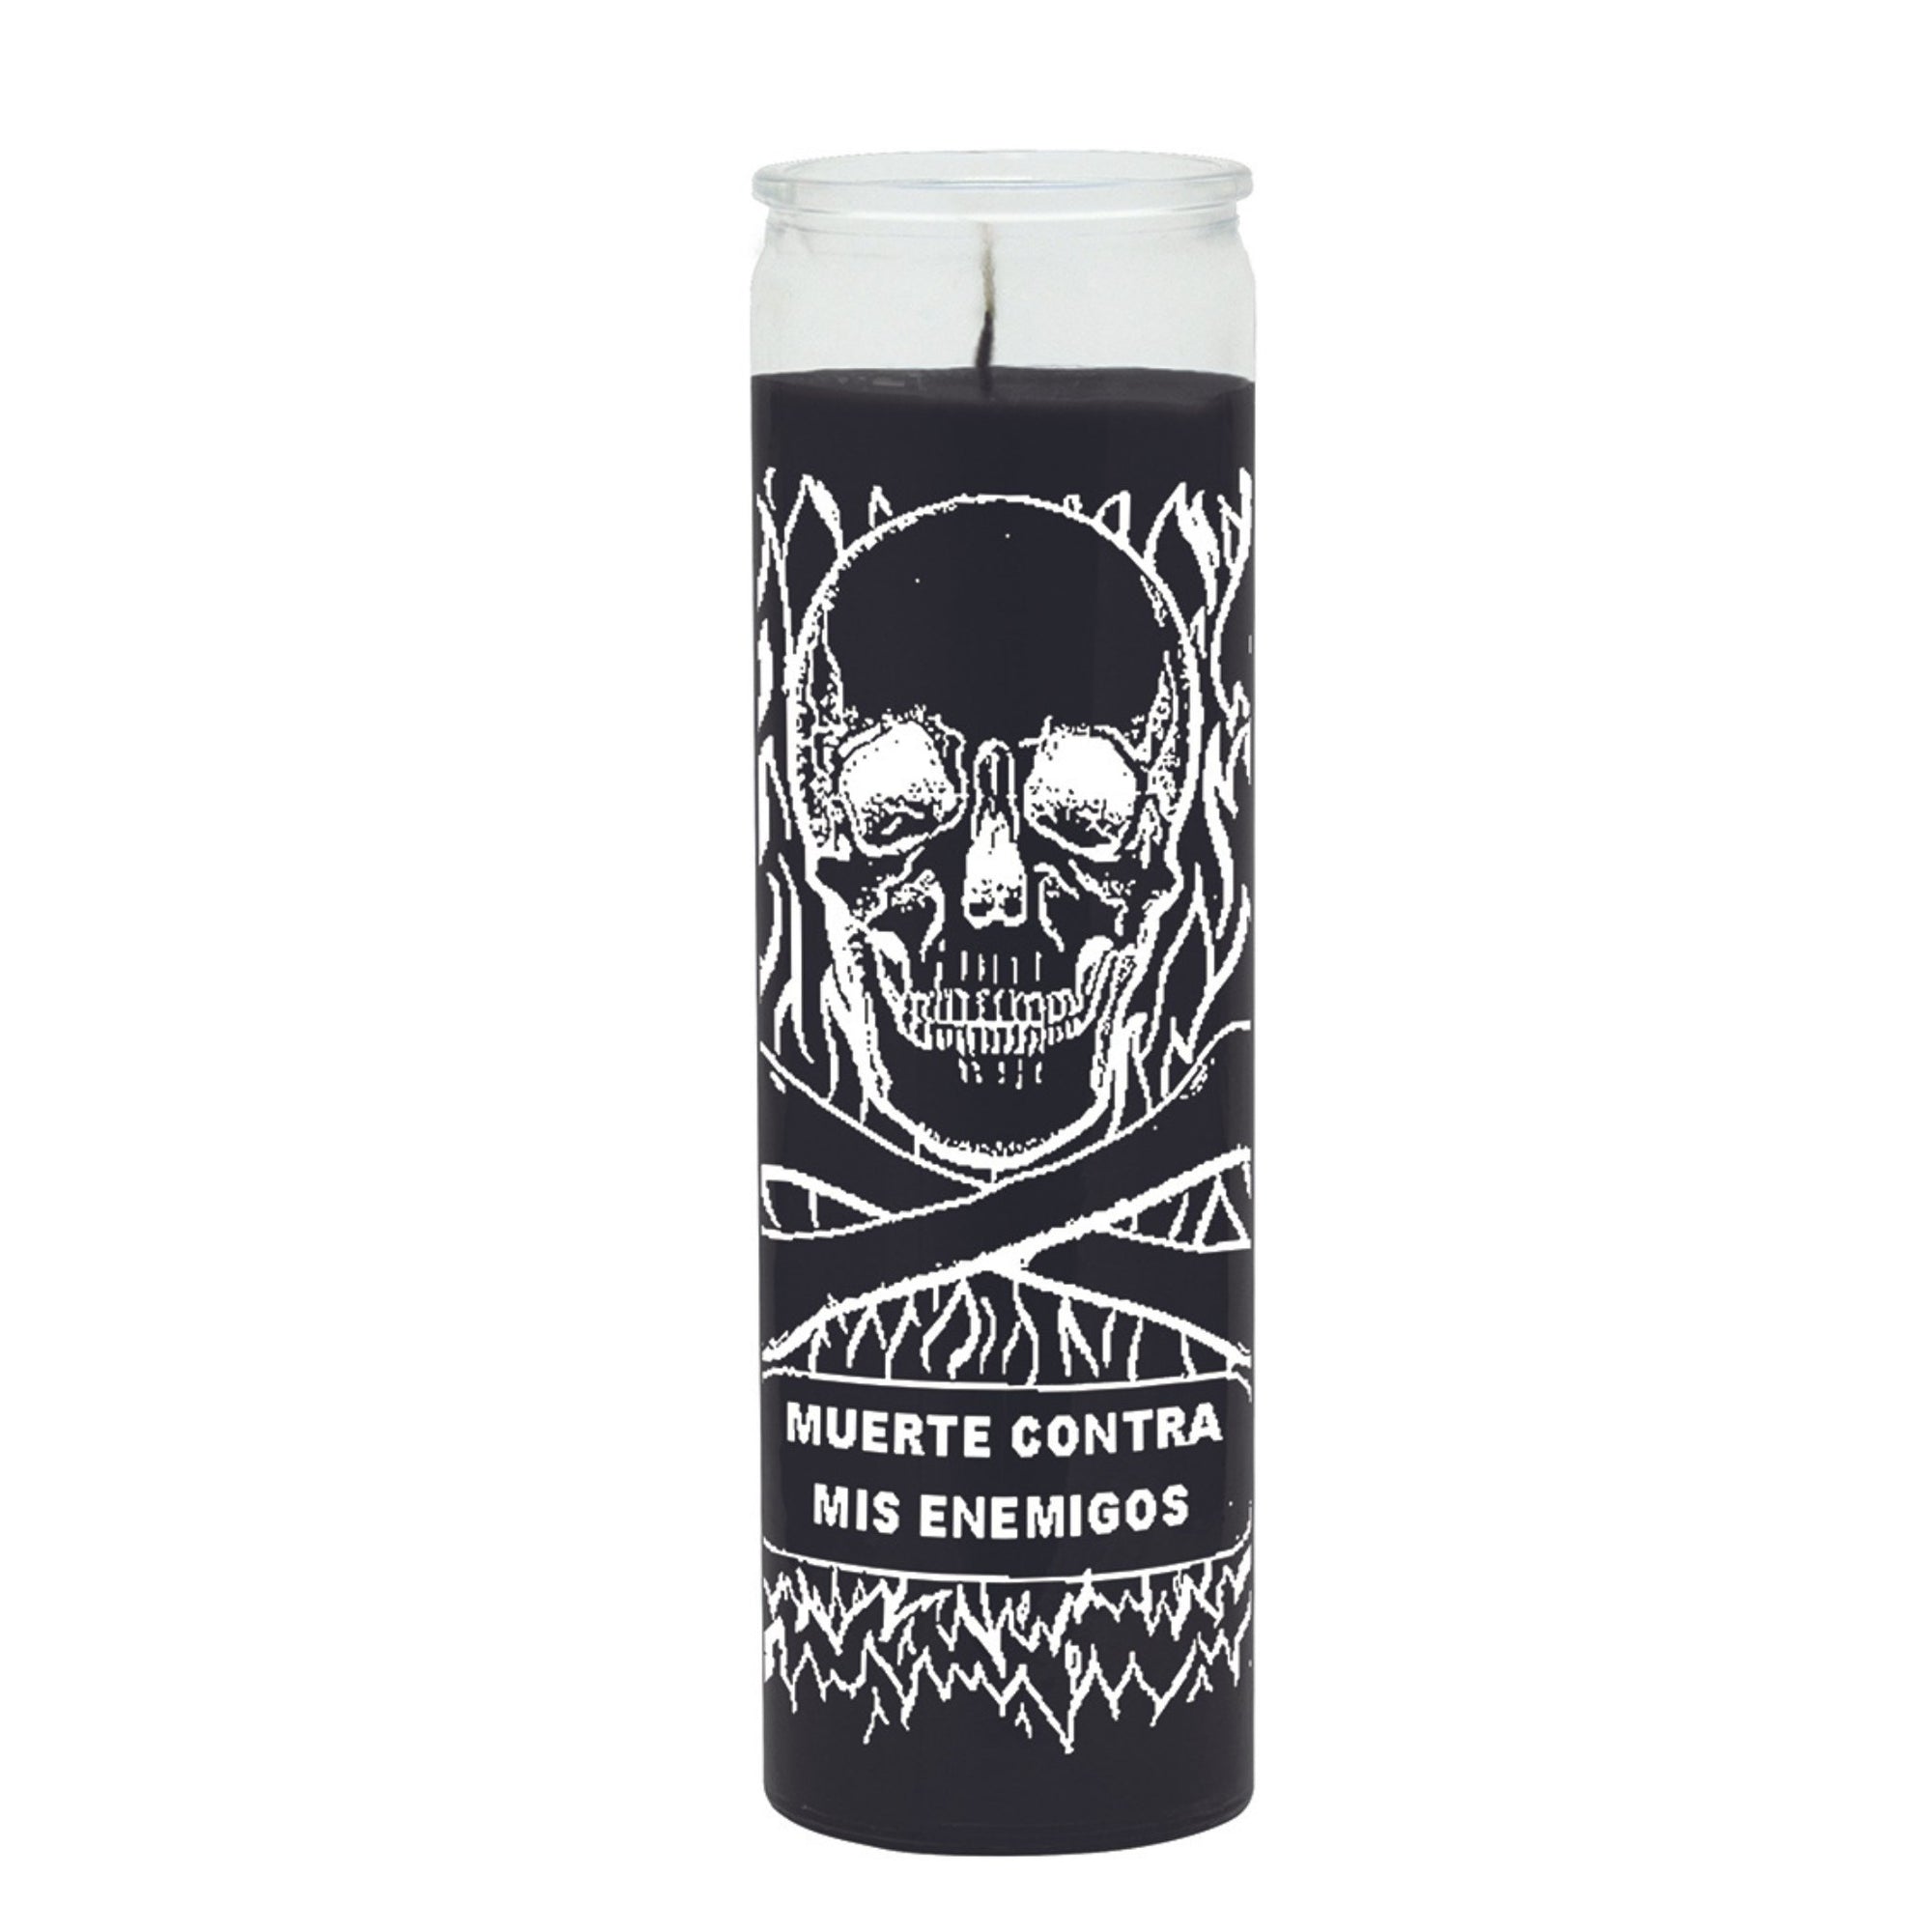 Protection from Enemies (Muerte Contra Mis Enemigos)- Black to protect yourself from any harm or evil spells or hexes from enemies - Shop Cosmic Healing